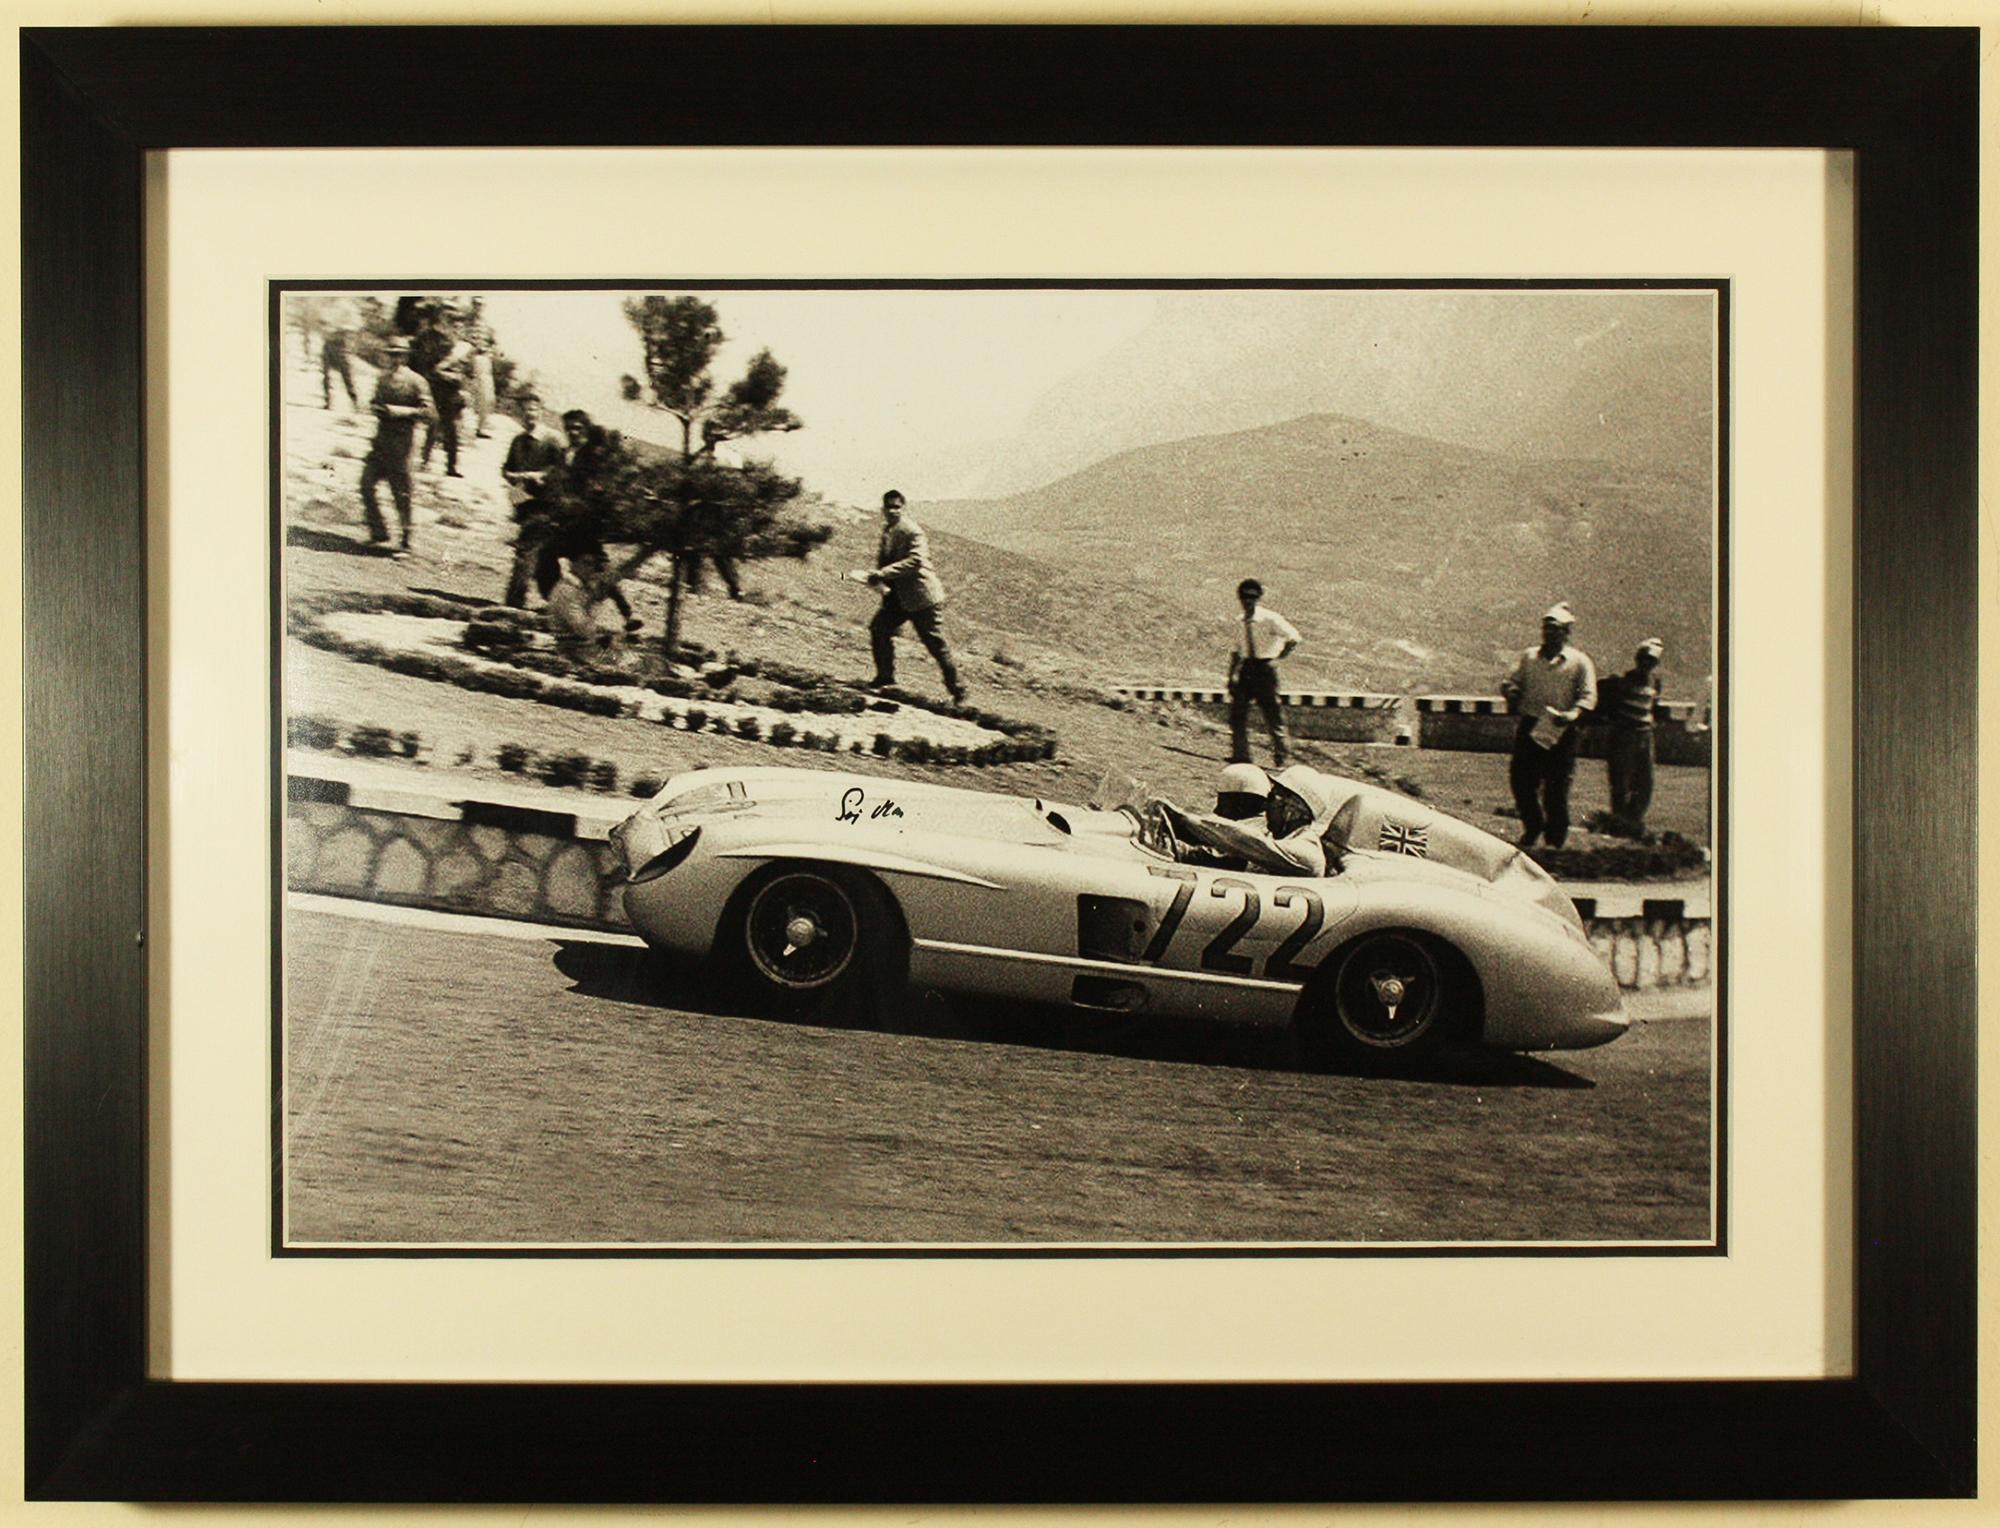 Unknown Black and White Photograph - Mercedes Benz 300SLR, No 722, Mille Miglia 1955 signed by Stirling Moss